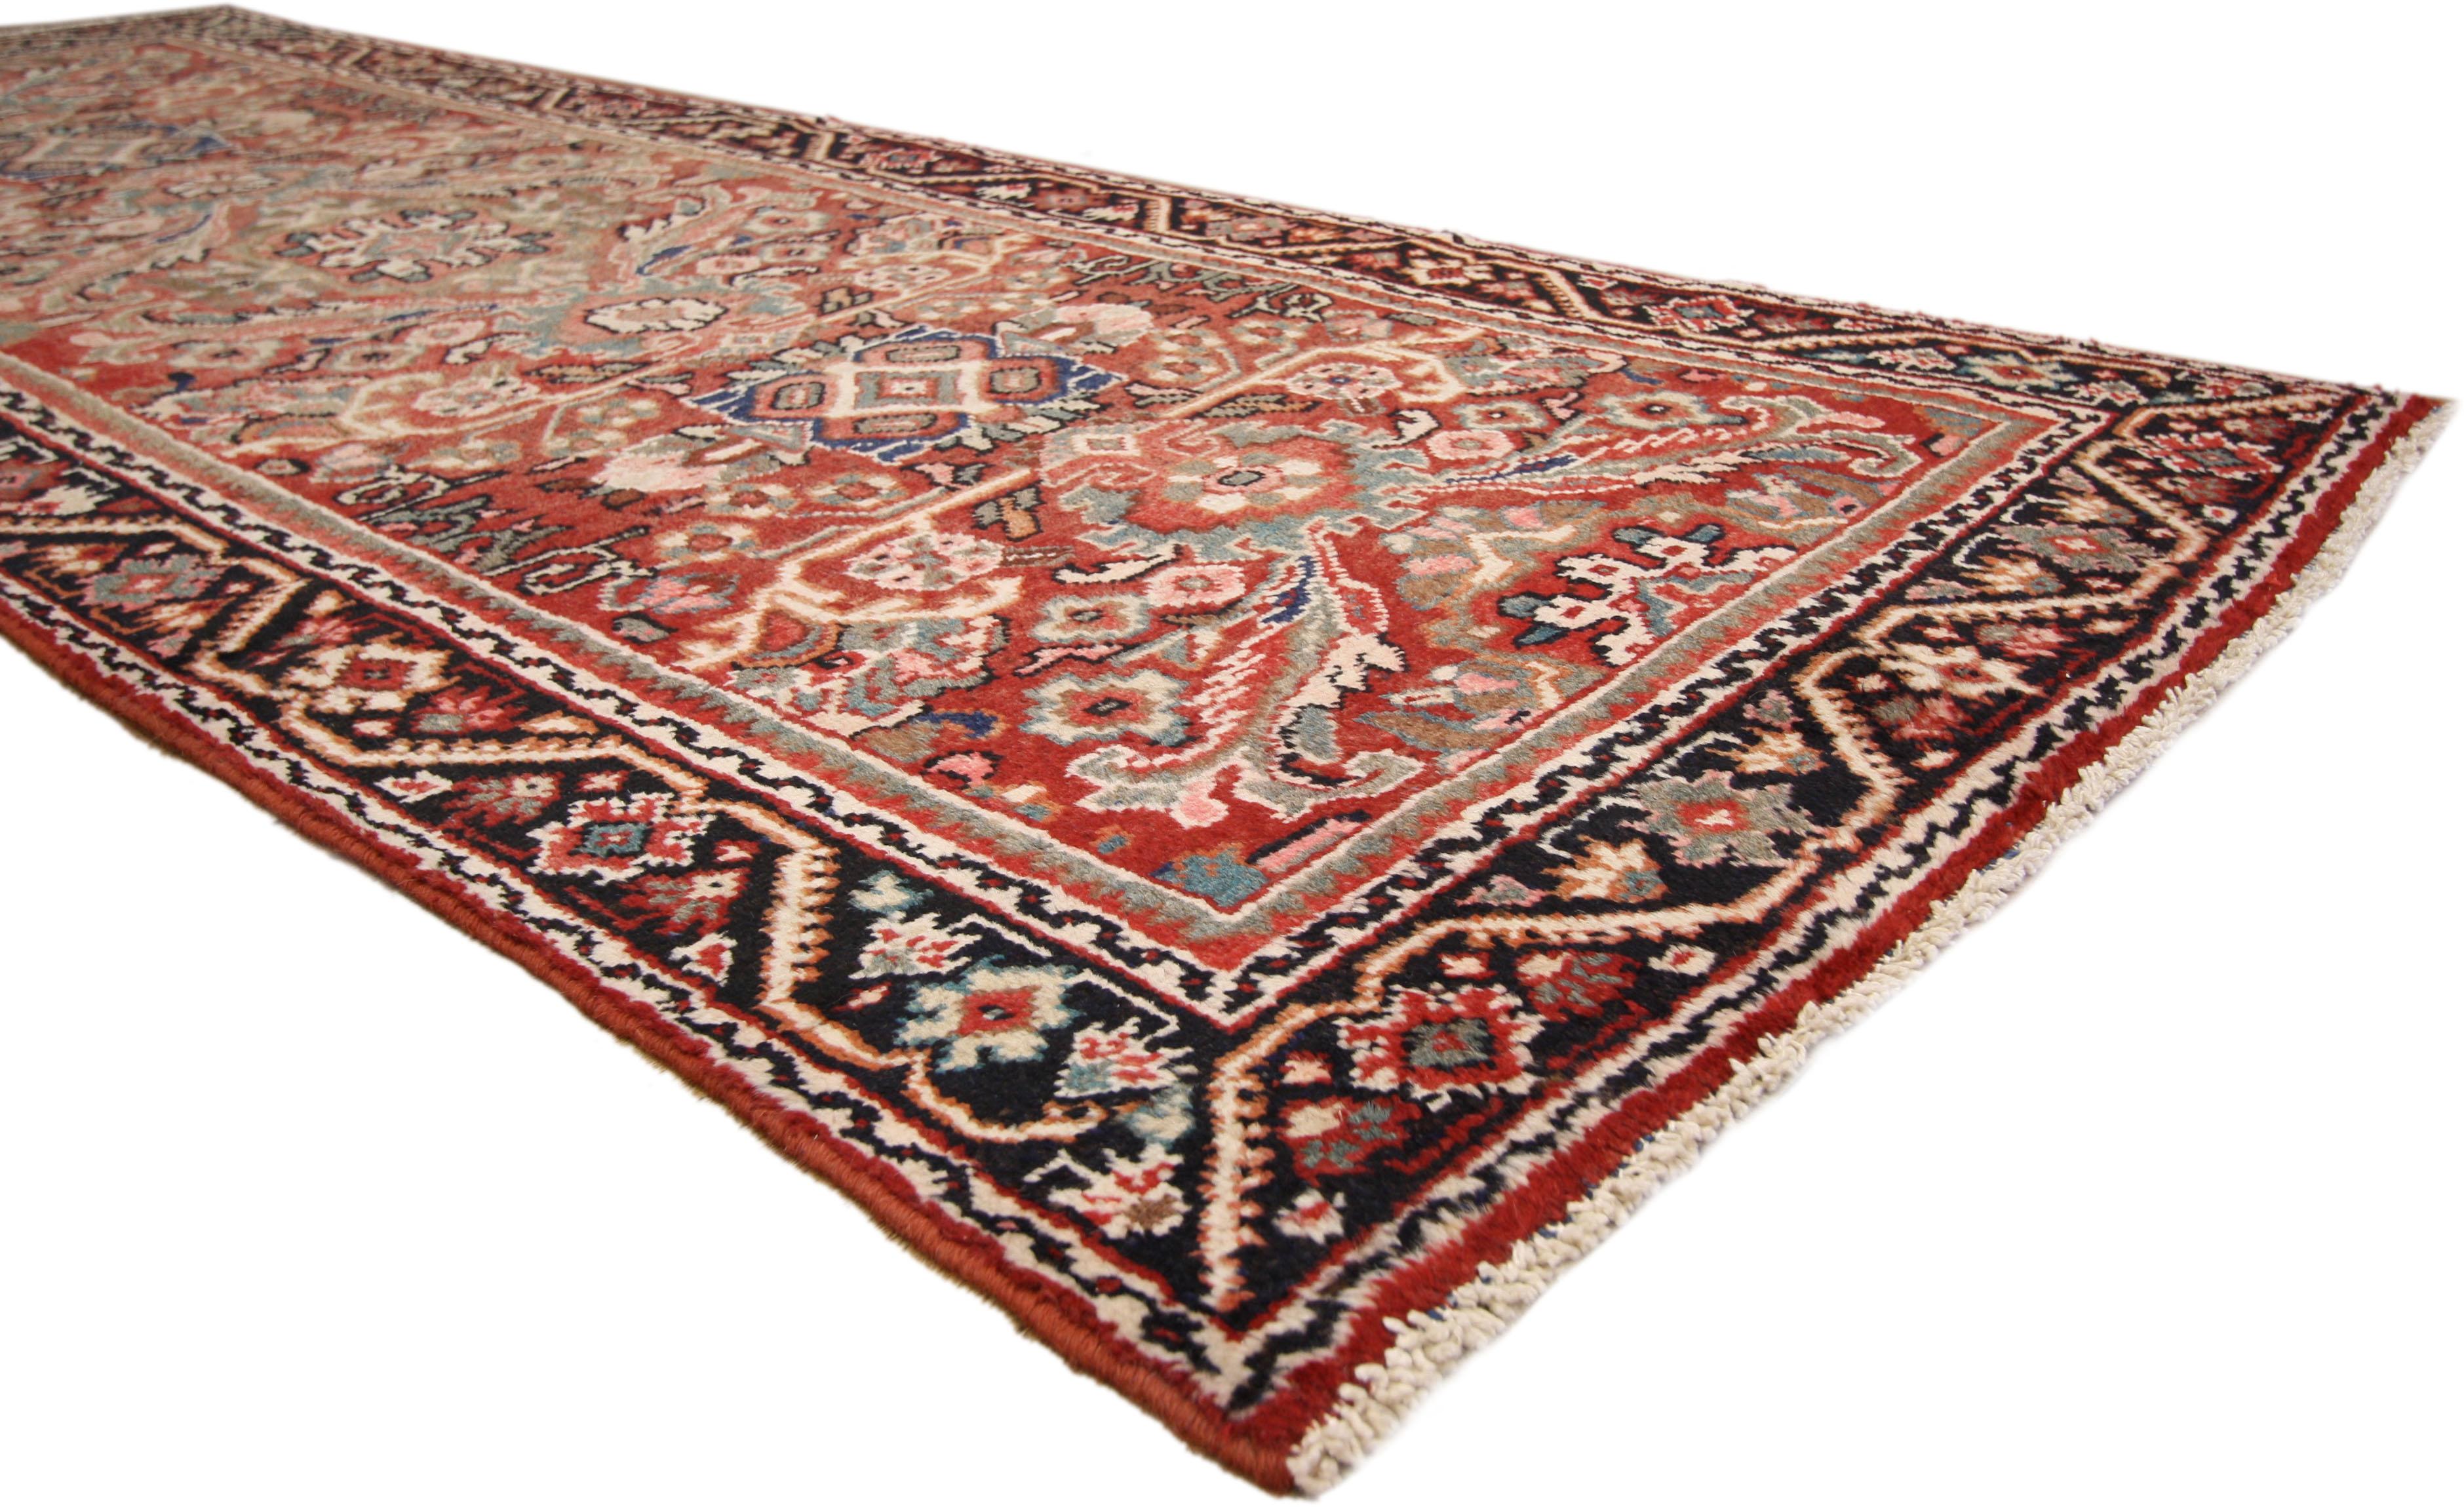 75980, vintage Persian Mahal runner, Traditional Style hallway runner. This hand knotted wool vintage Persian Mahal runner features a Sultanabad design composed of large scale Herati motif alternating with square shapes, blooming palmettes,